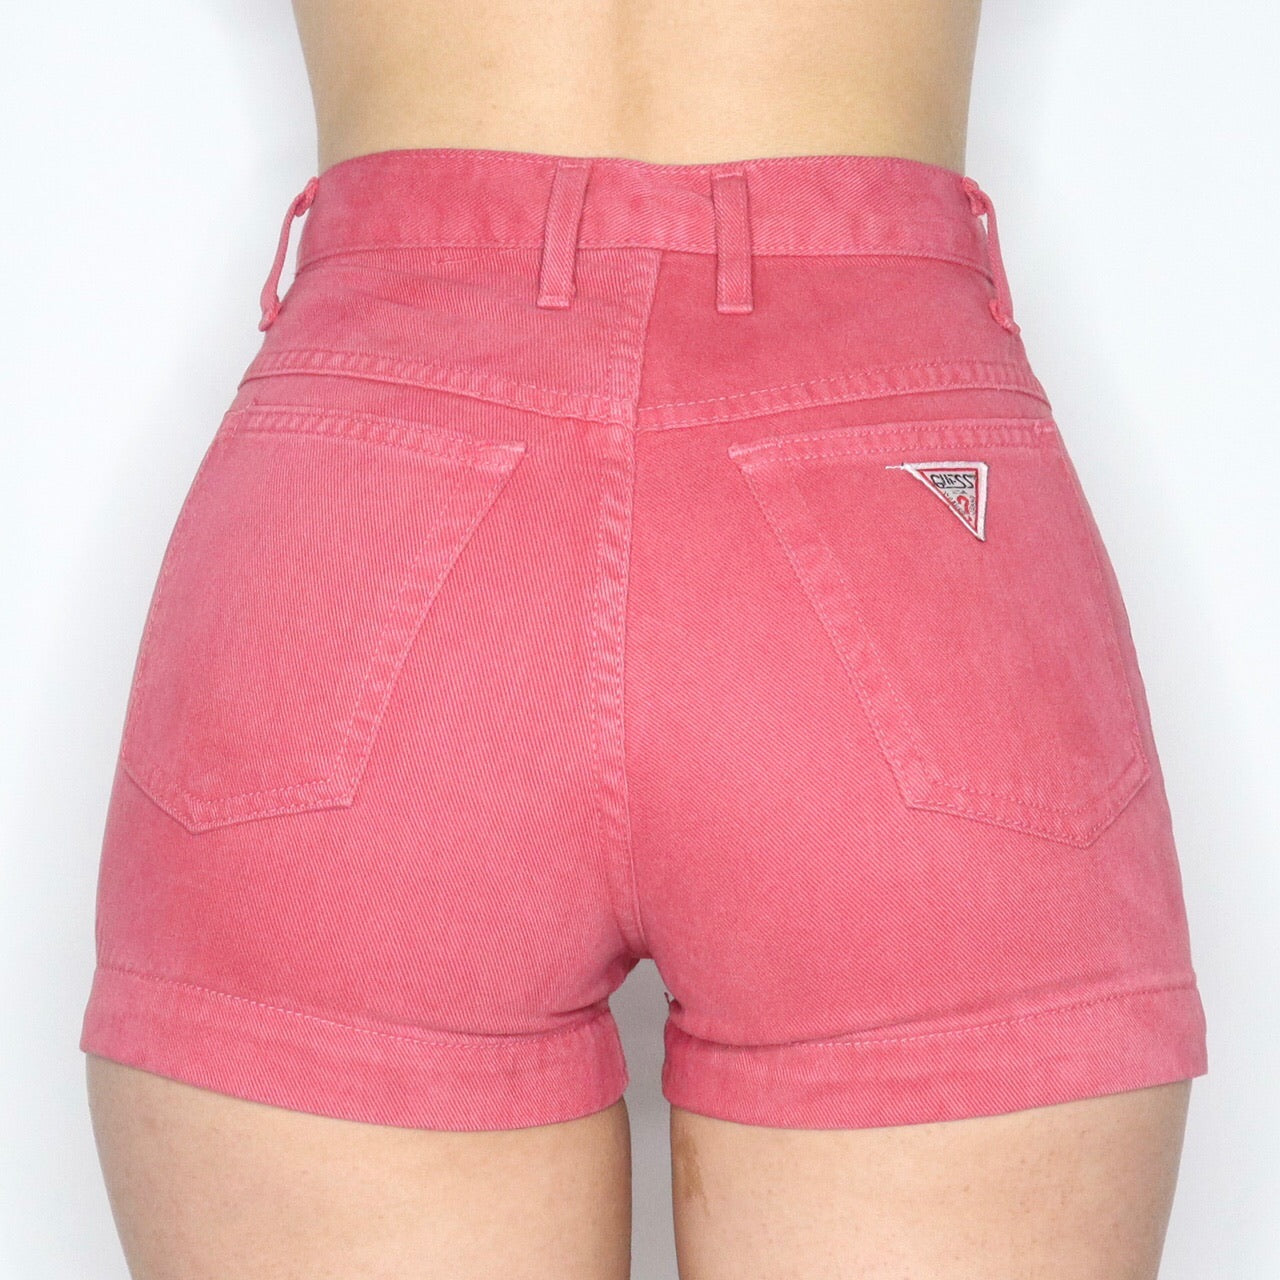 Vintage 80s Guess High Waisted Pale Red Denim Shorts